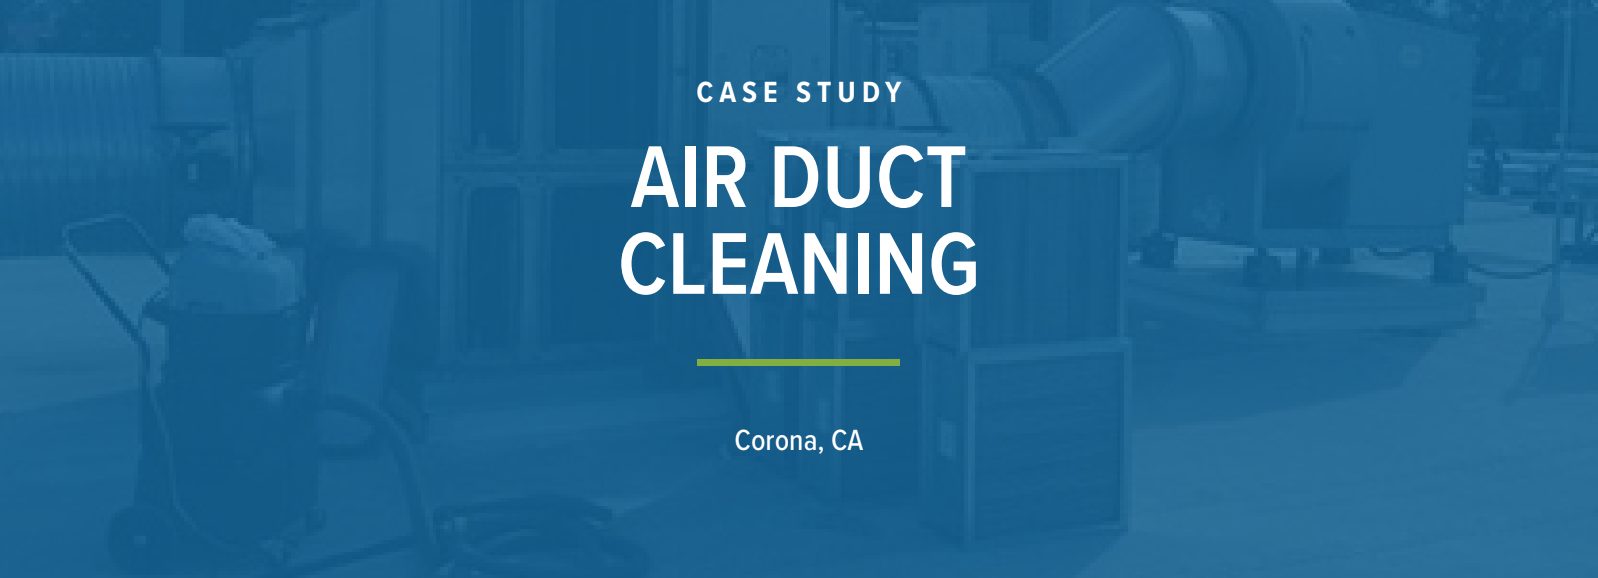 Case study: air duct cleaning